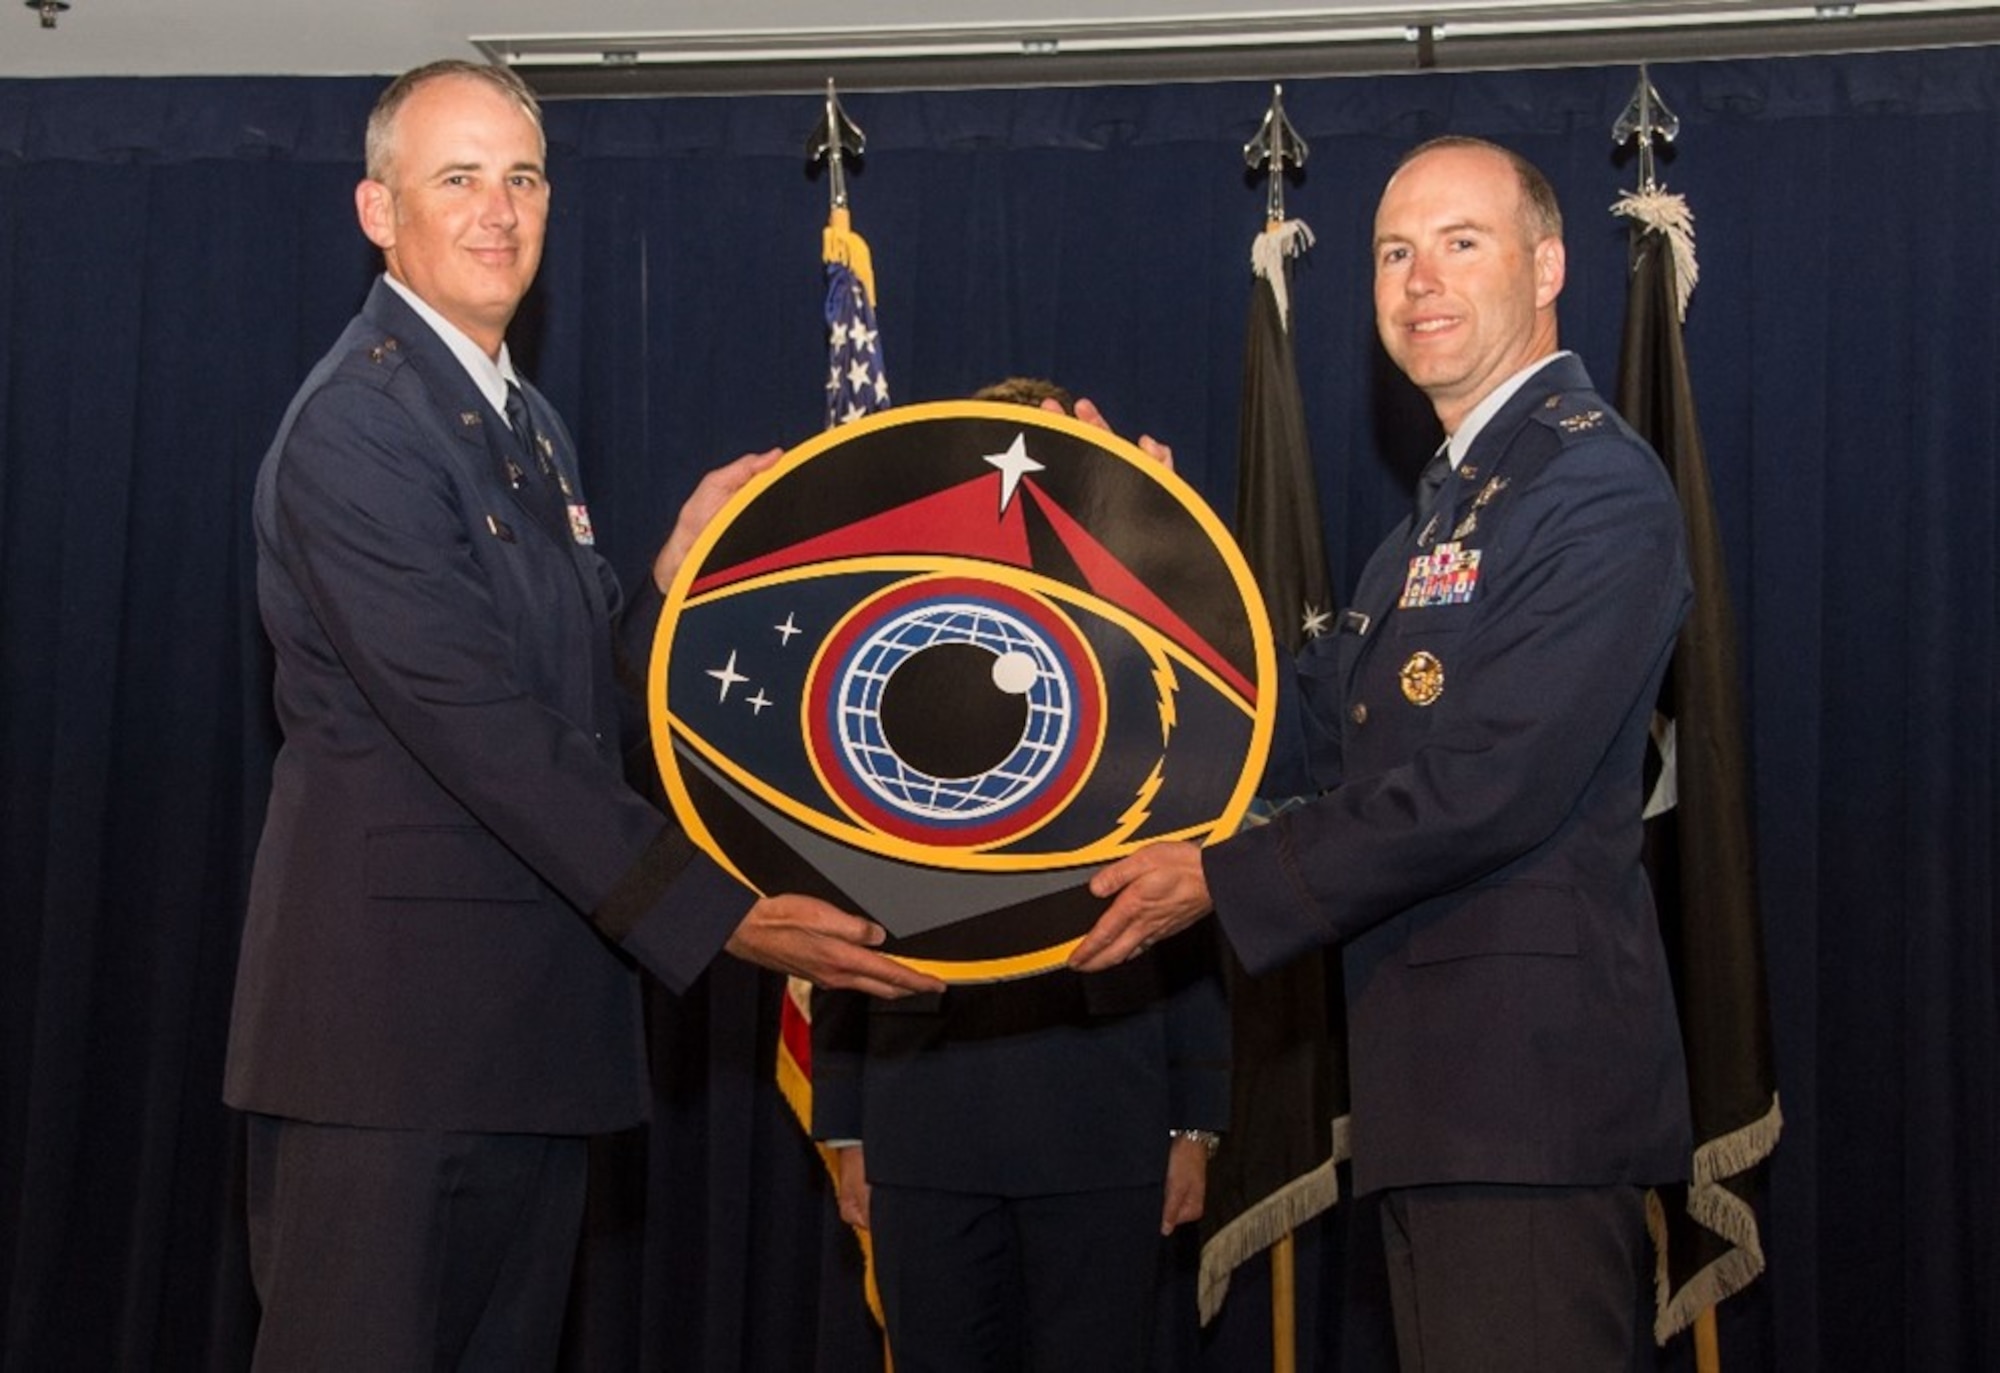 Brig. Gen. Jason Cothern, Space Systems Command, deputy commander, passes the Space Sensing Program Executive Office emblem to Col. Robert Davis, Space Sensing, incoming program executive officer (PEO), during a change of leadership ceremony at SSC headquarters, Los Angeles Air Force Base, California, June 8, 2023. Davis succeeds Col. Brian Denaro, who served as Space Sensing’s PEO once SSC was established as a U.S. Space Force Field Command in August 2021. (U.S. Space Force photo by Van De Ha)